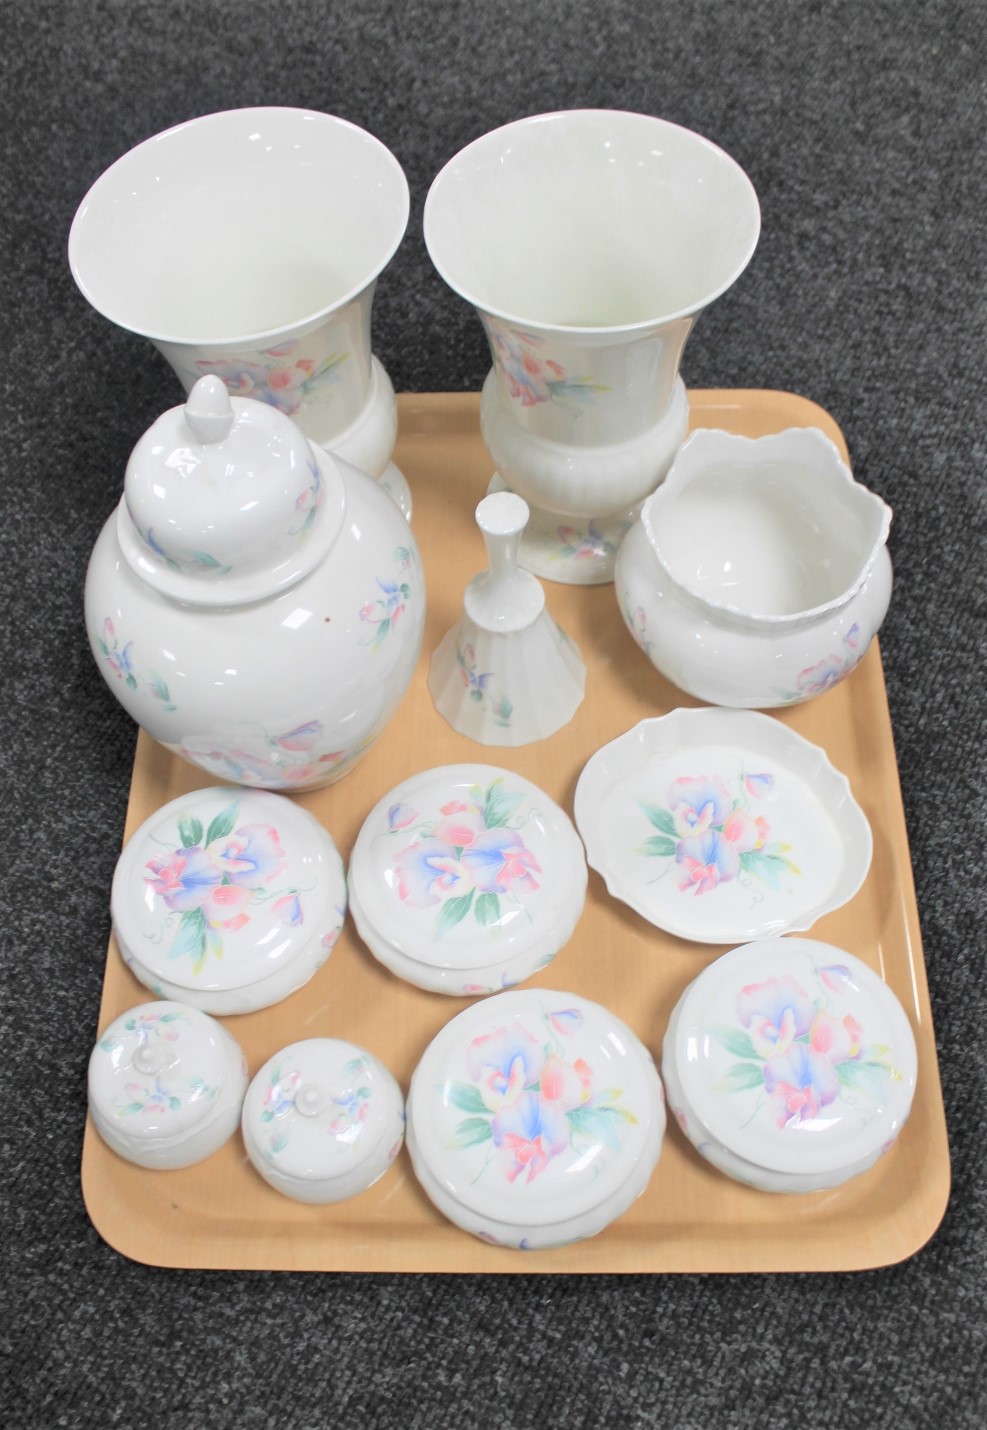 A tray of Aynsley Little Sweetheart china, vases,